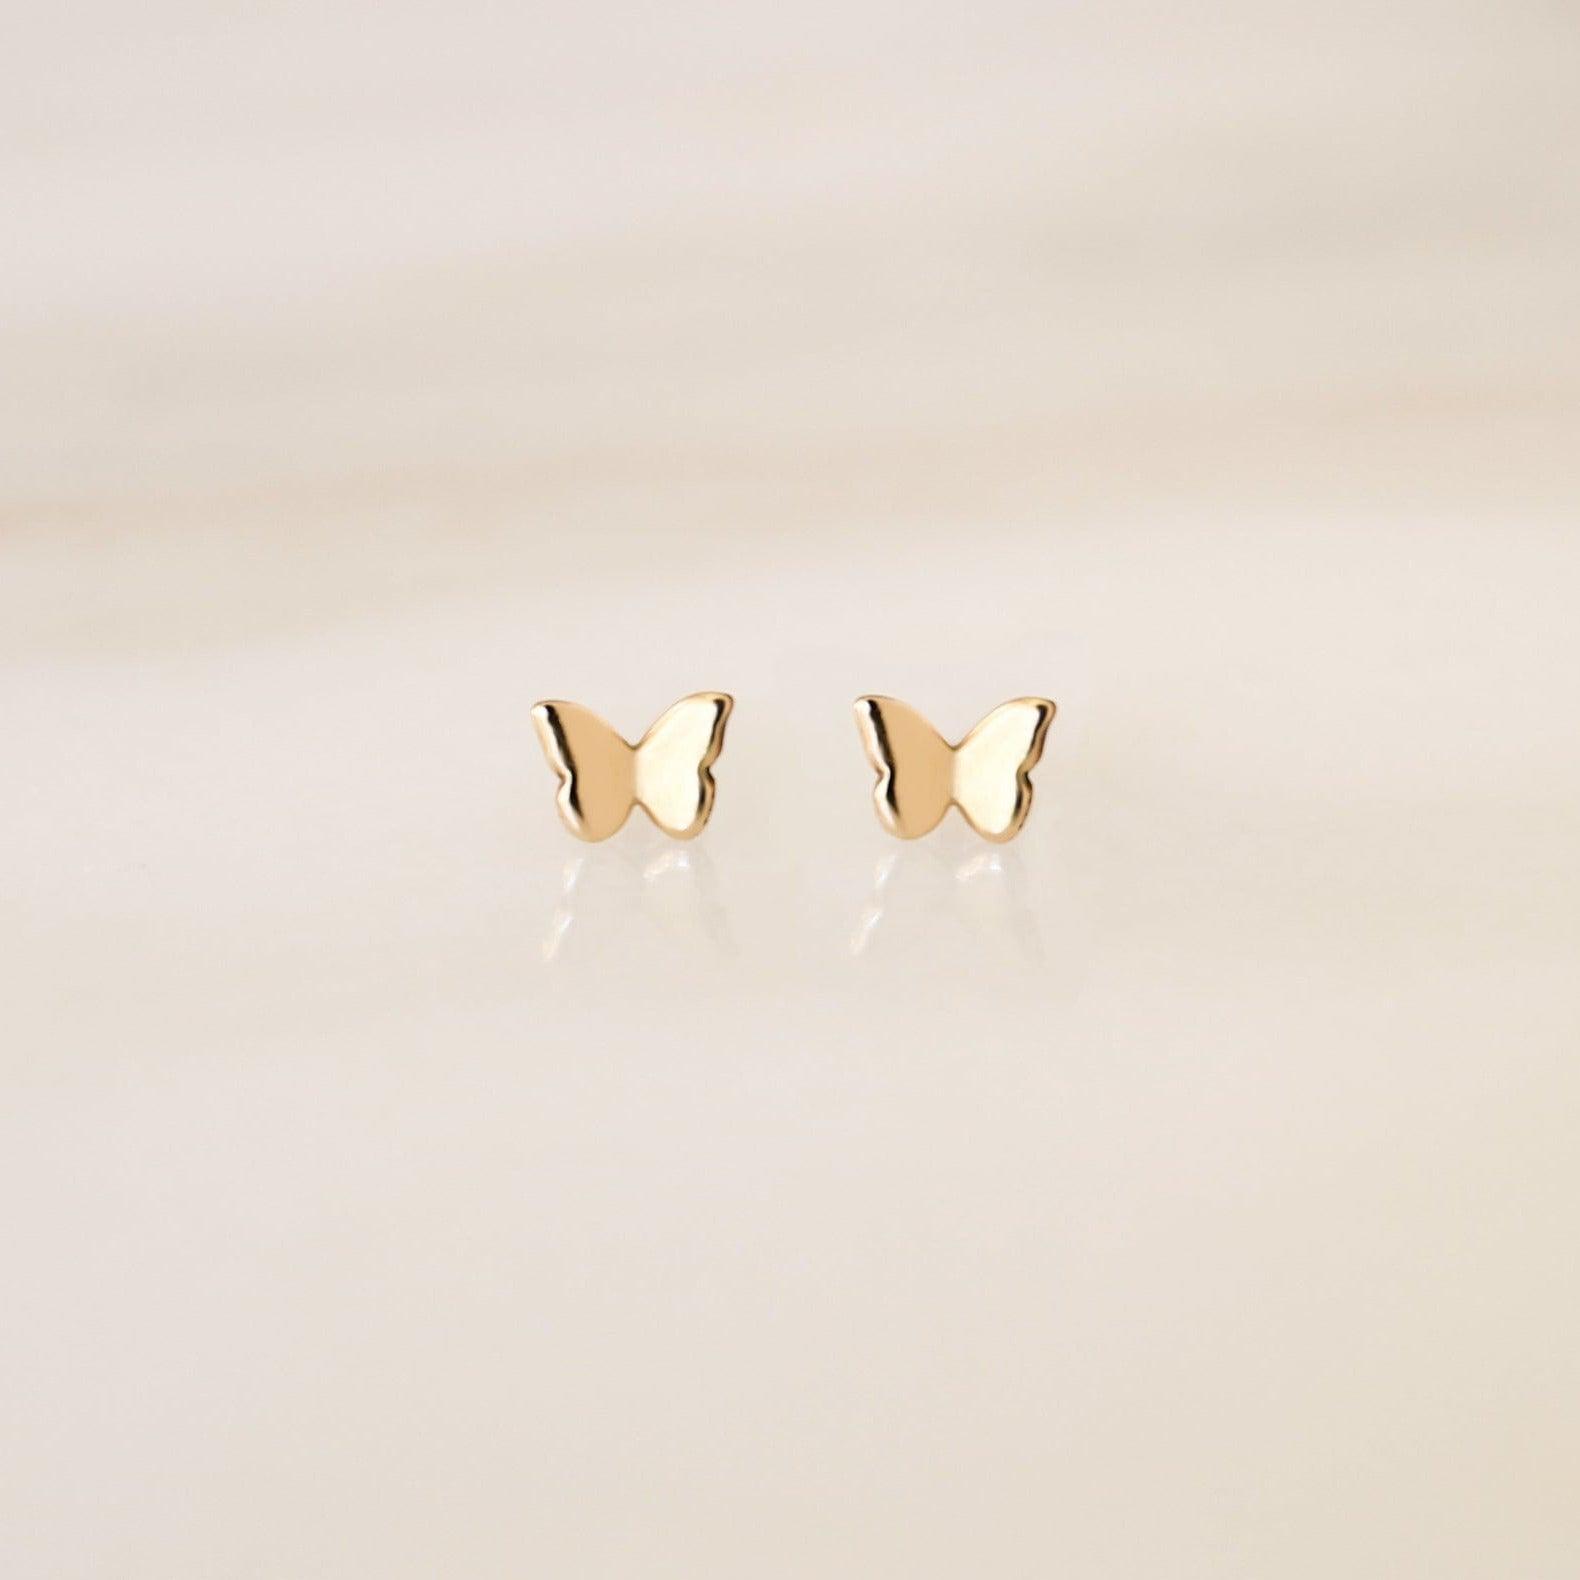 Mama + Little Butterfly Stud Earring Set - Nolia Jewelry - Meaningful + Sustainably Handcrafted Jewelry